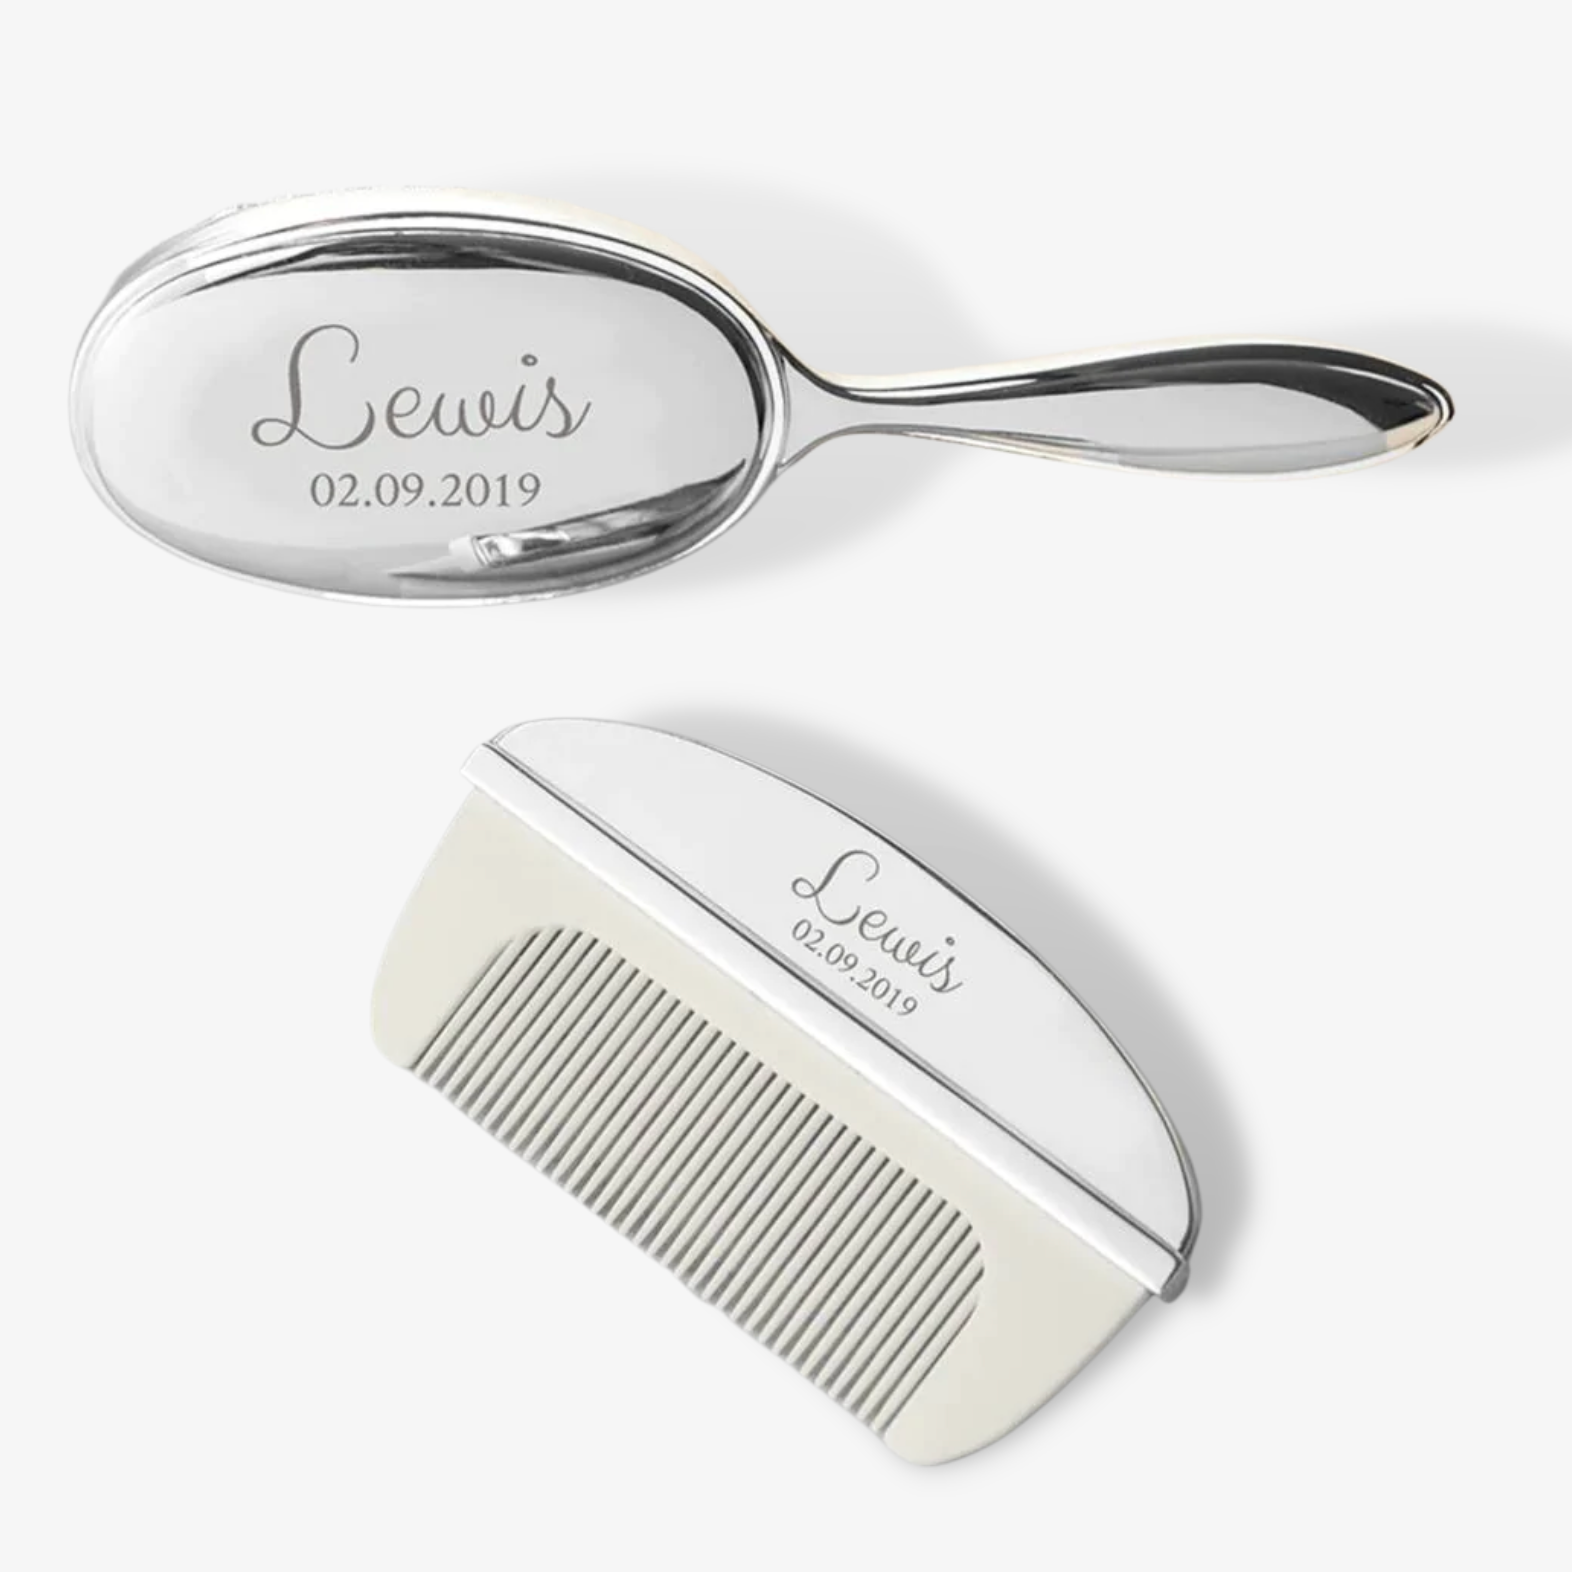 Personalised Silver Plated Baby Brush And Comb Set